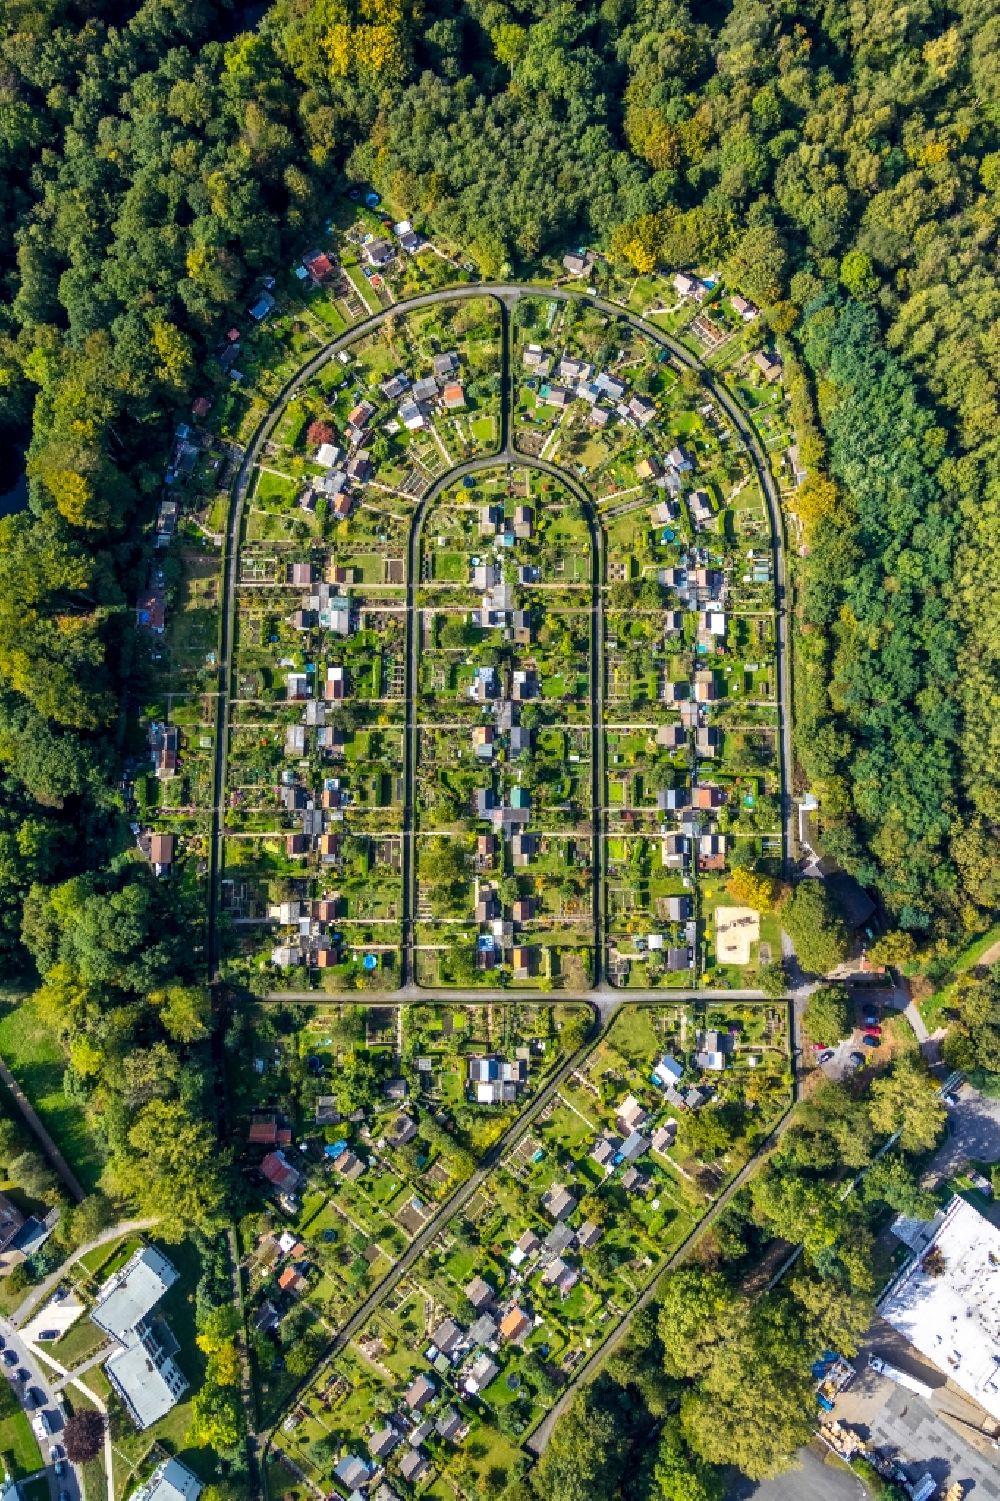 Bochum from above - Allotments gardens plots of the association - the garden colony Kleingartenverein Rottmannshof e.V. on Harpener Heide in the district Grumme in Bochum in the state North Rhine-Westphalia, Germany